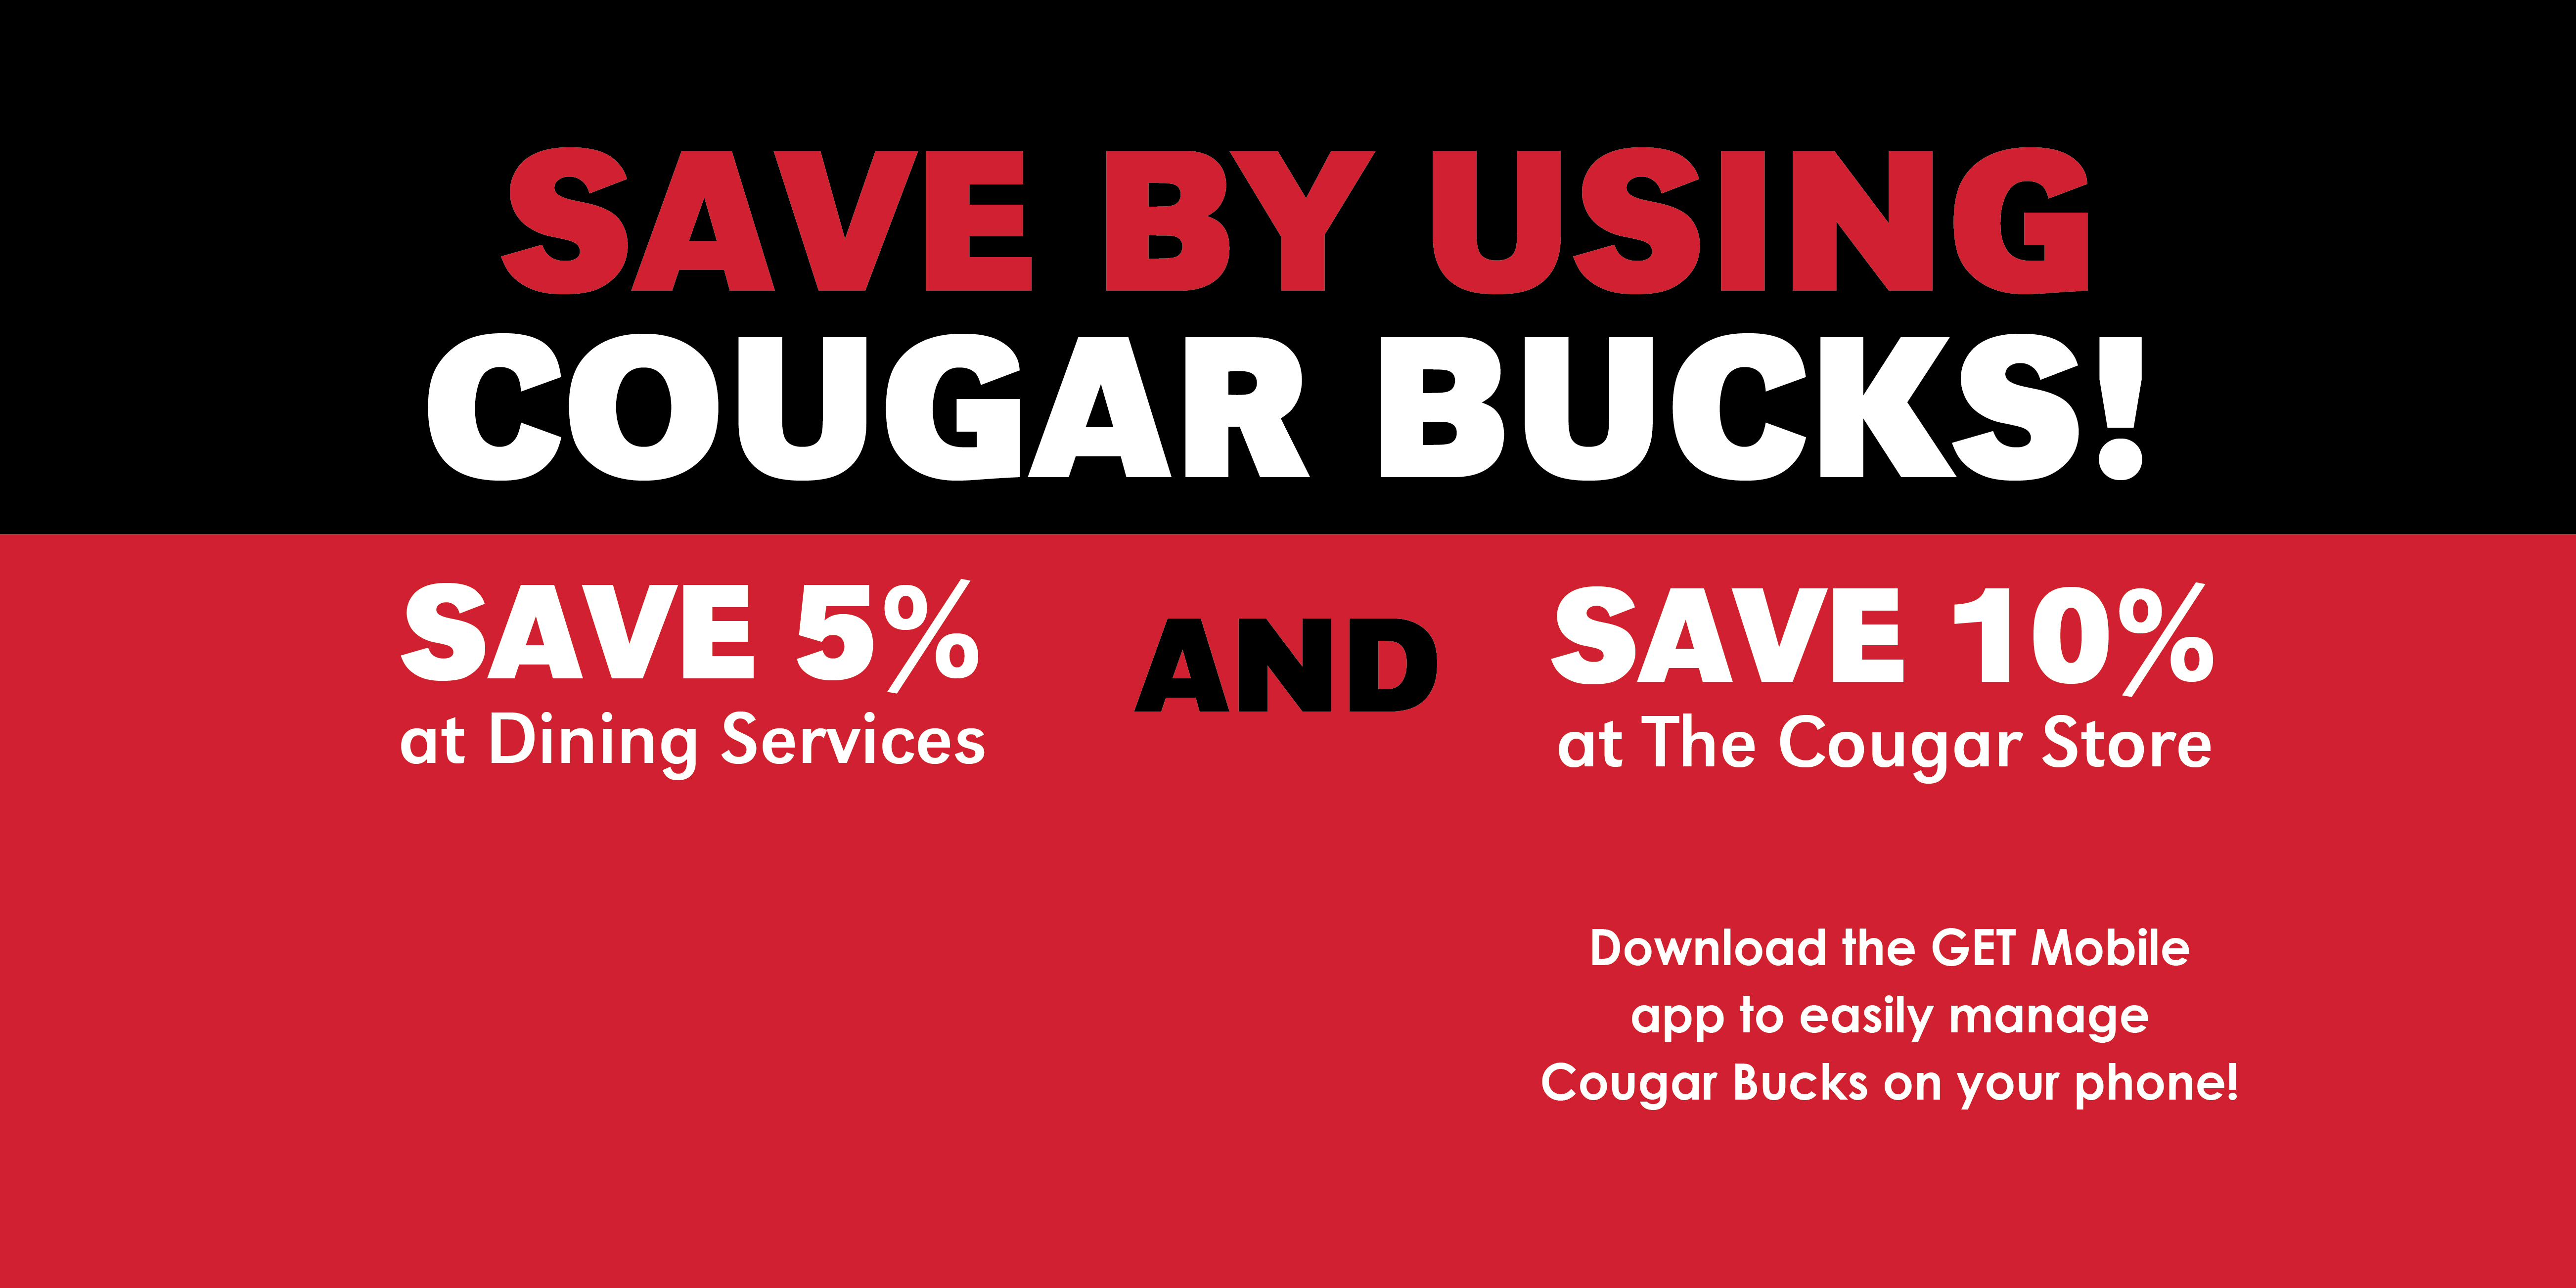 Get The Most Out of Your Cougar Card